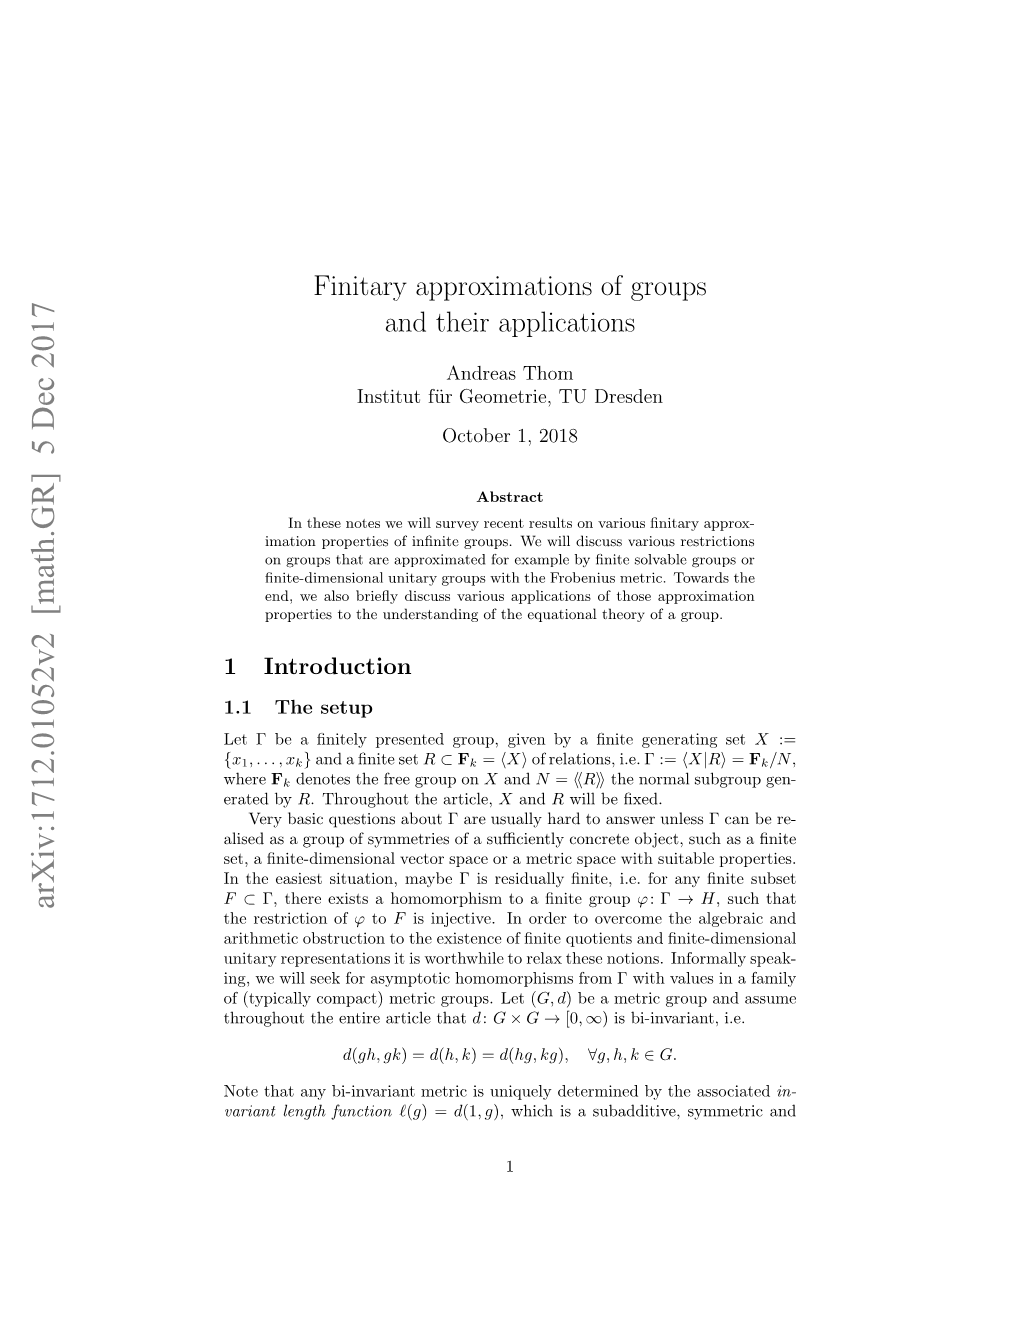 Finitary Approximations of Groups and Their Applications